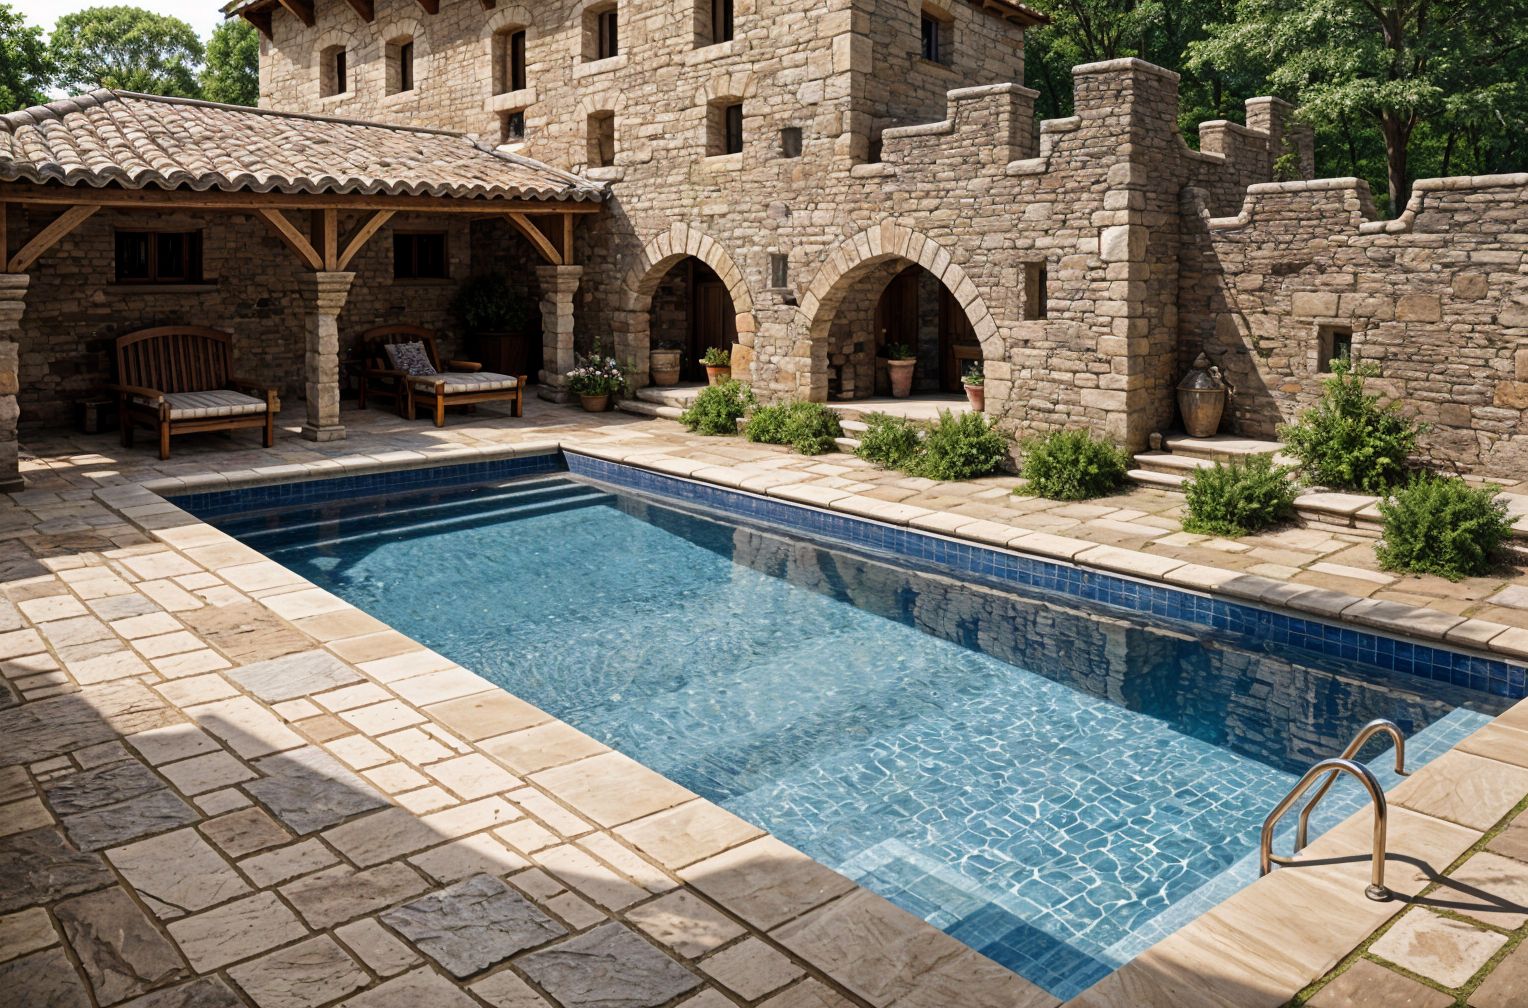 Medieval Outdoor Pool Area